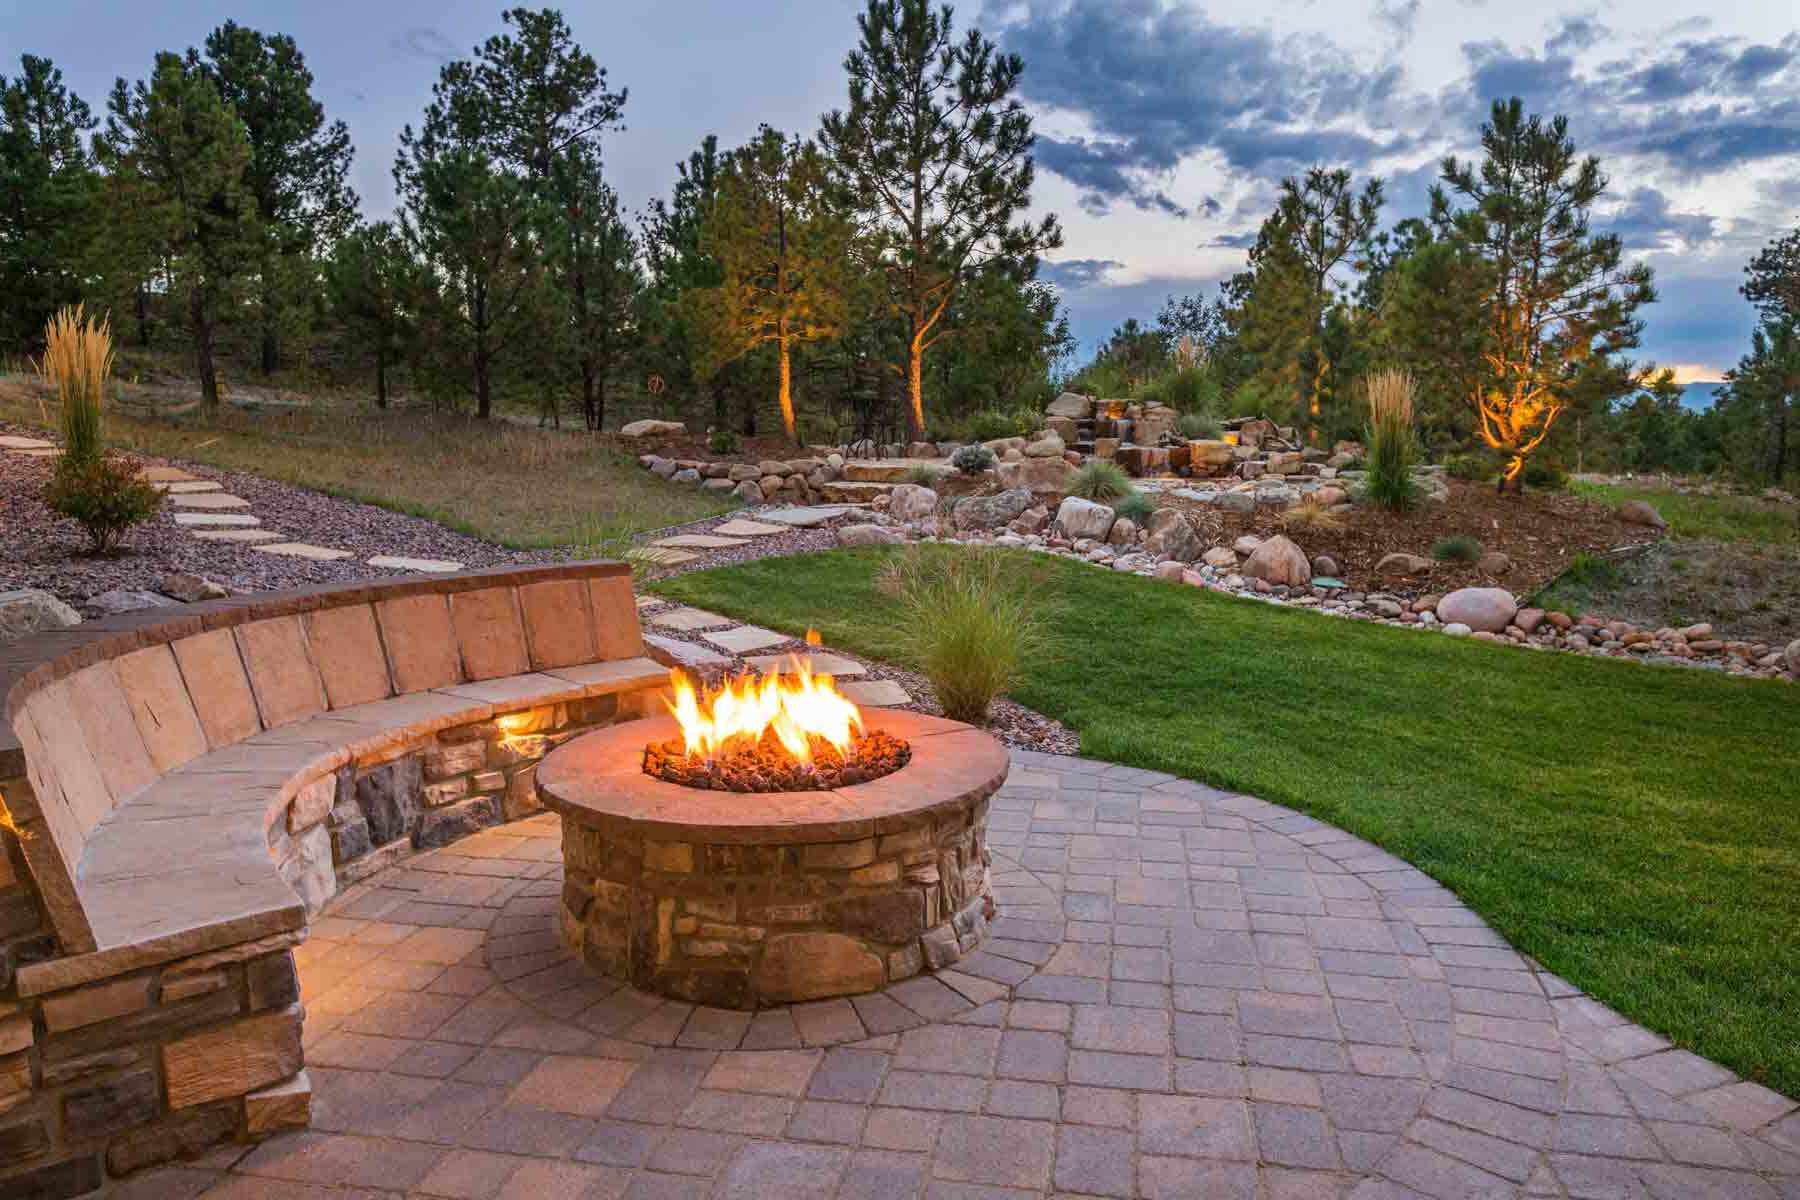 DIY Propane Fire Pit: Step-by-Step Guide To Building Your Own Outdoor Fire Feature